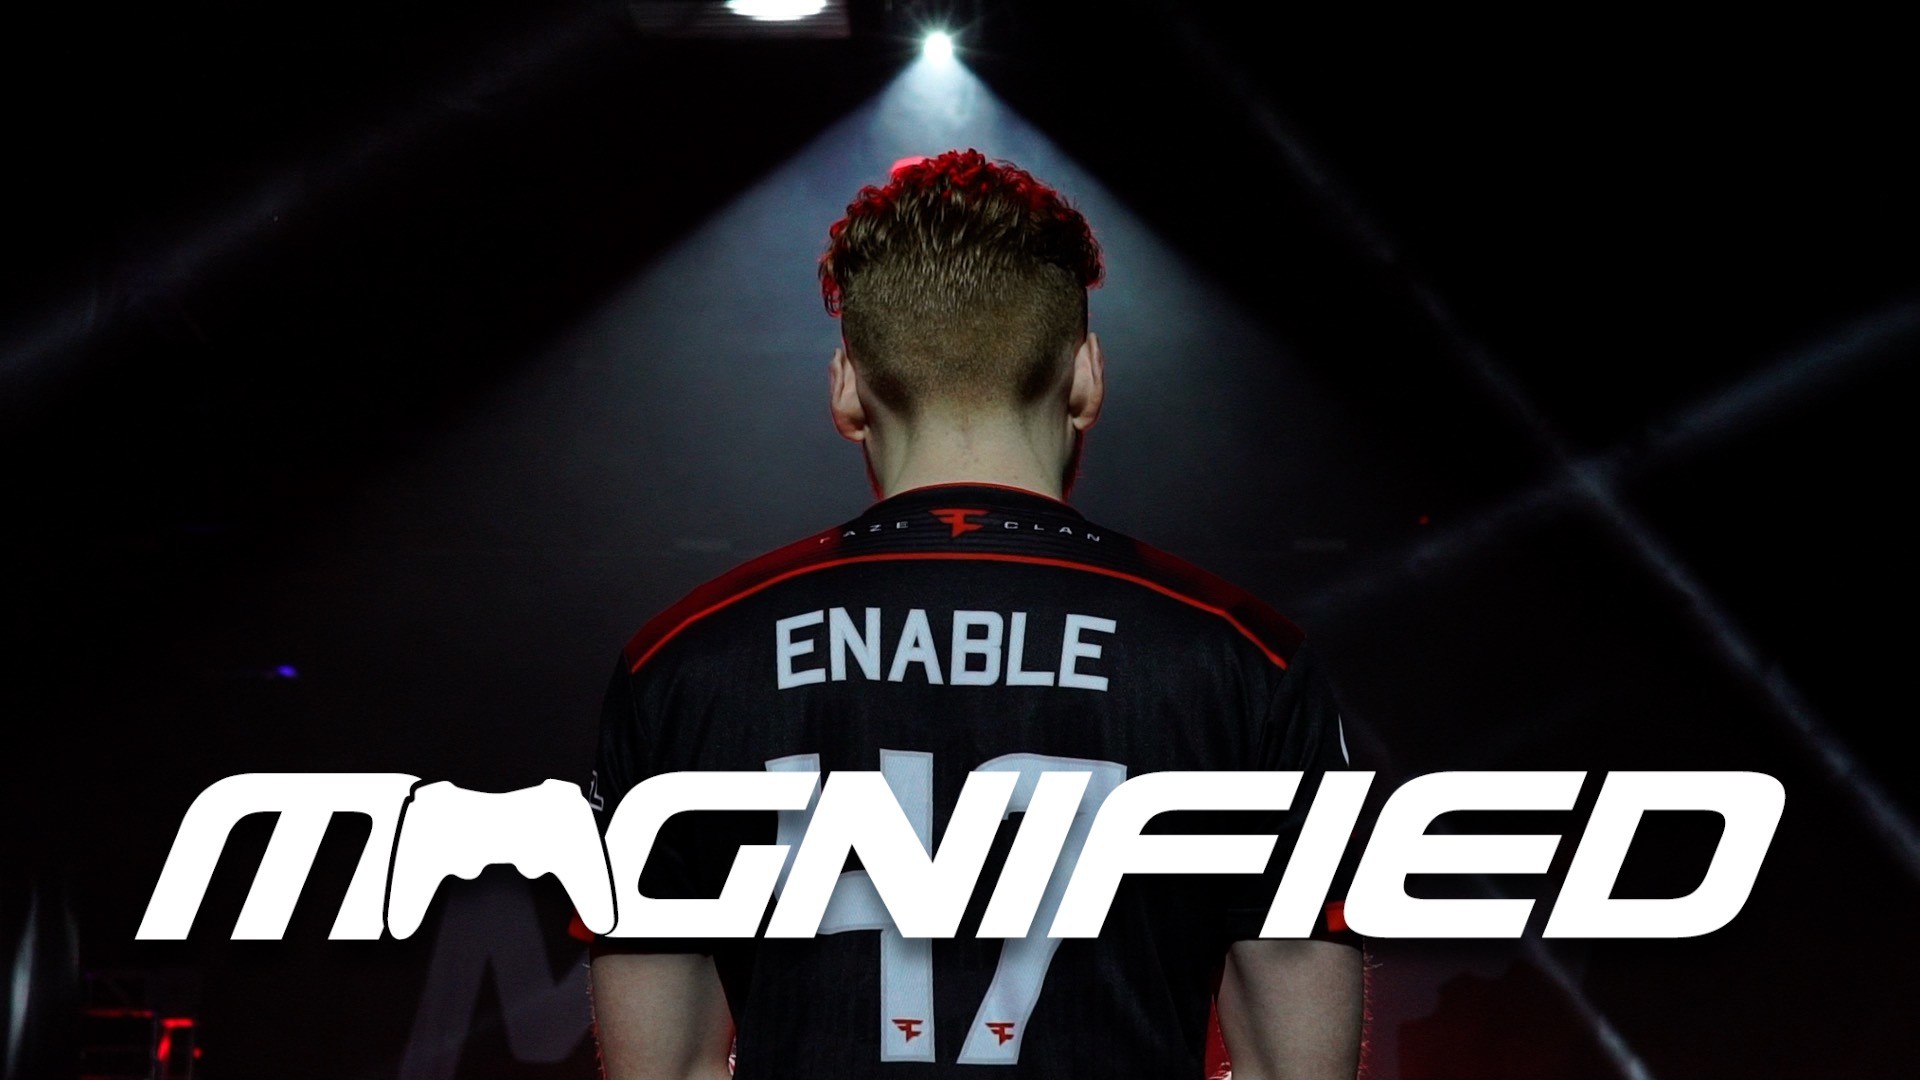 1920x1080 Magnified: Enable